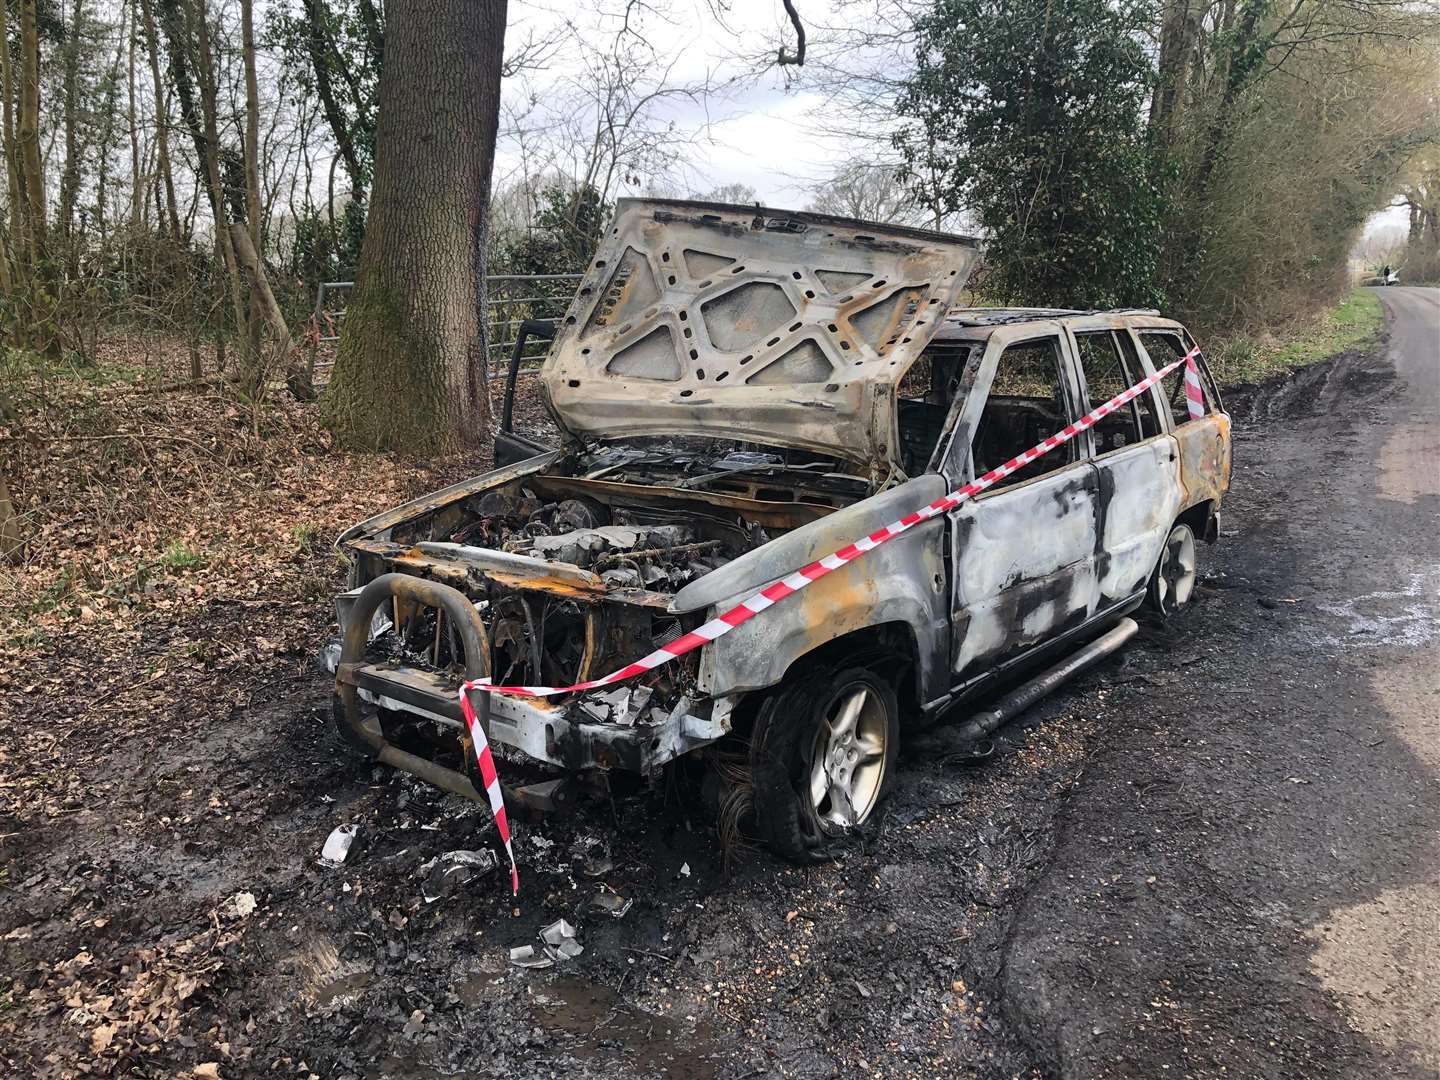 The vehicle used in the ram raid, torched soon after in Harbourne Lane